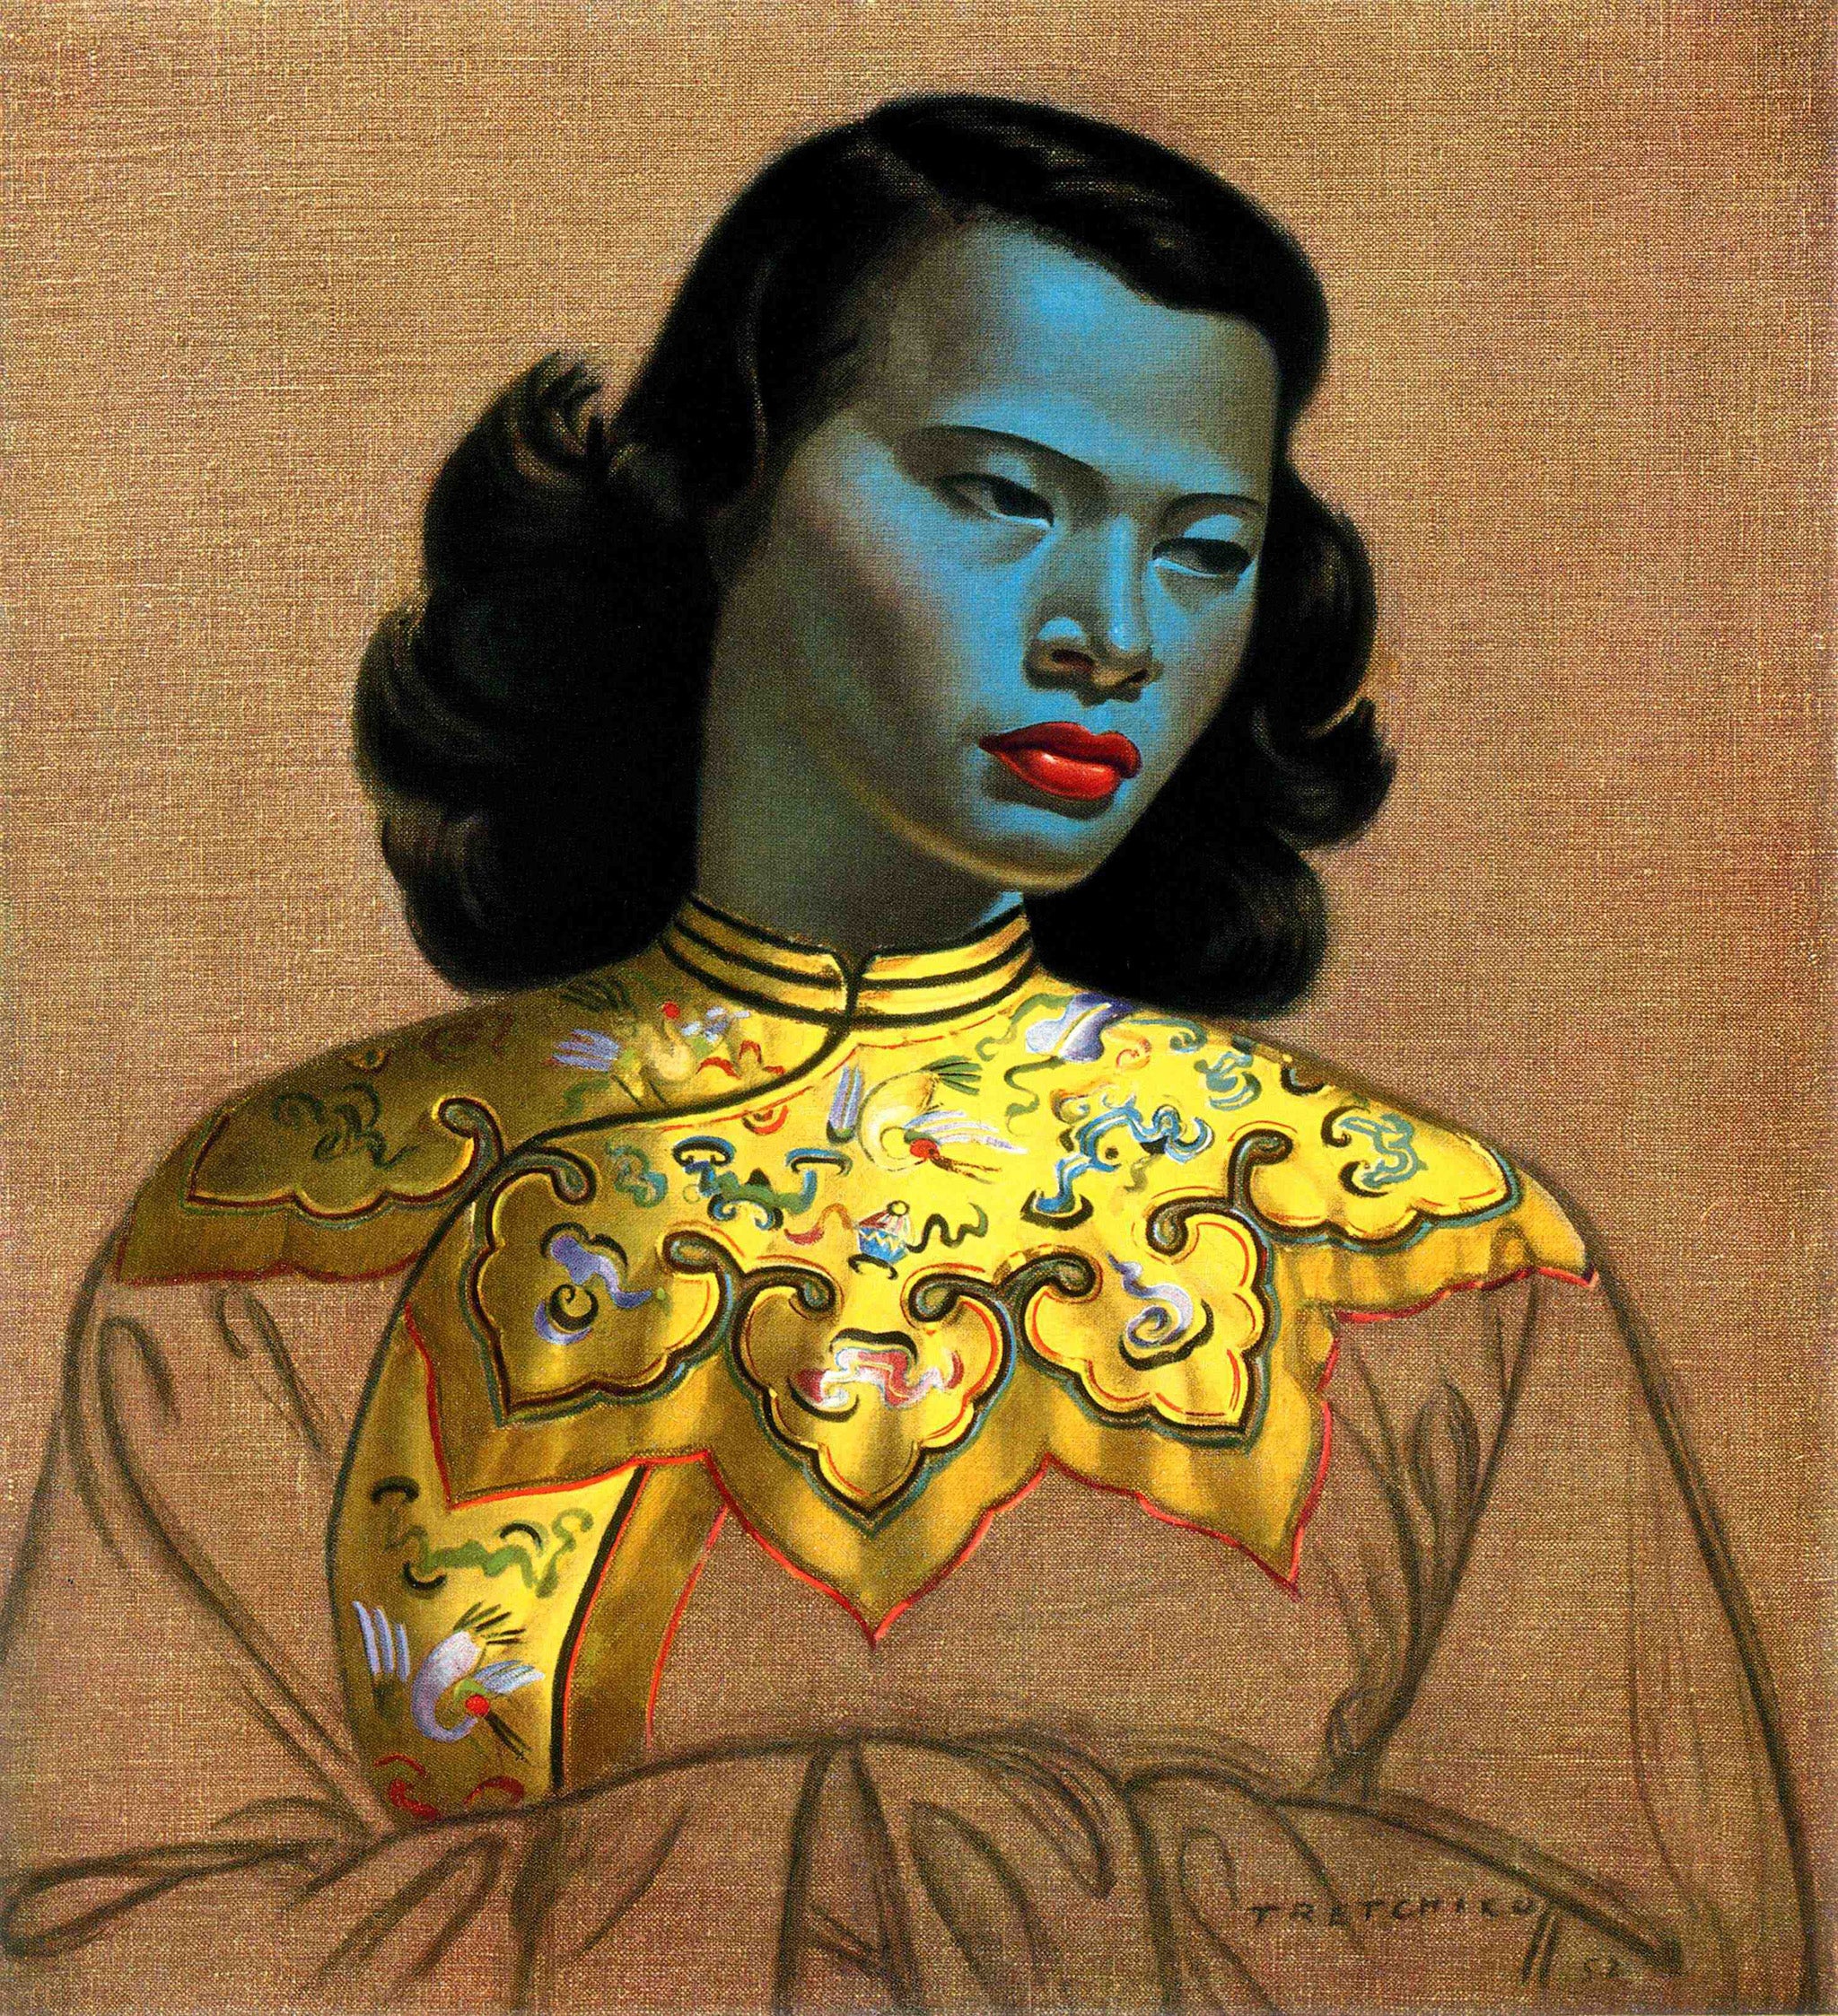 Bonham's undated handout photo of 'Chinese Girl', the most famous work of Vladimir Tretchikoff, the Russian emigre who settled in South Africa.